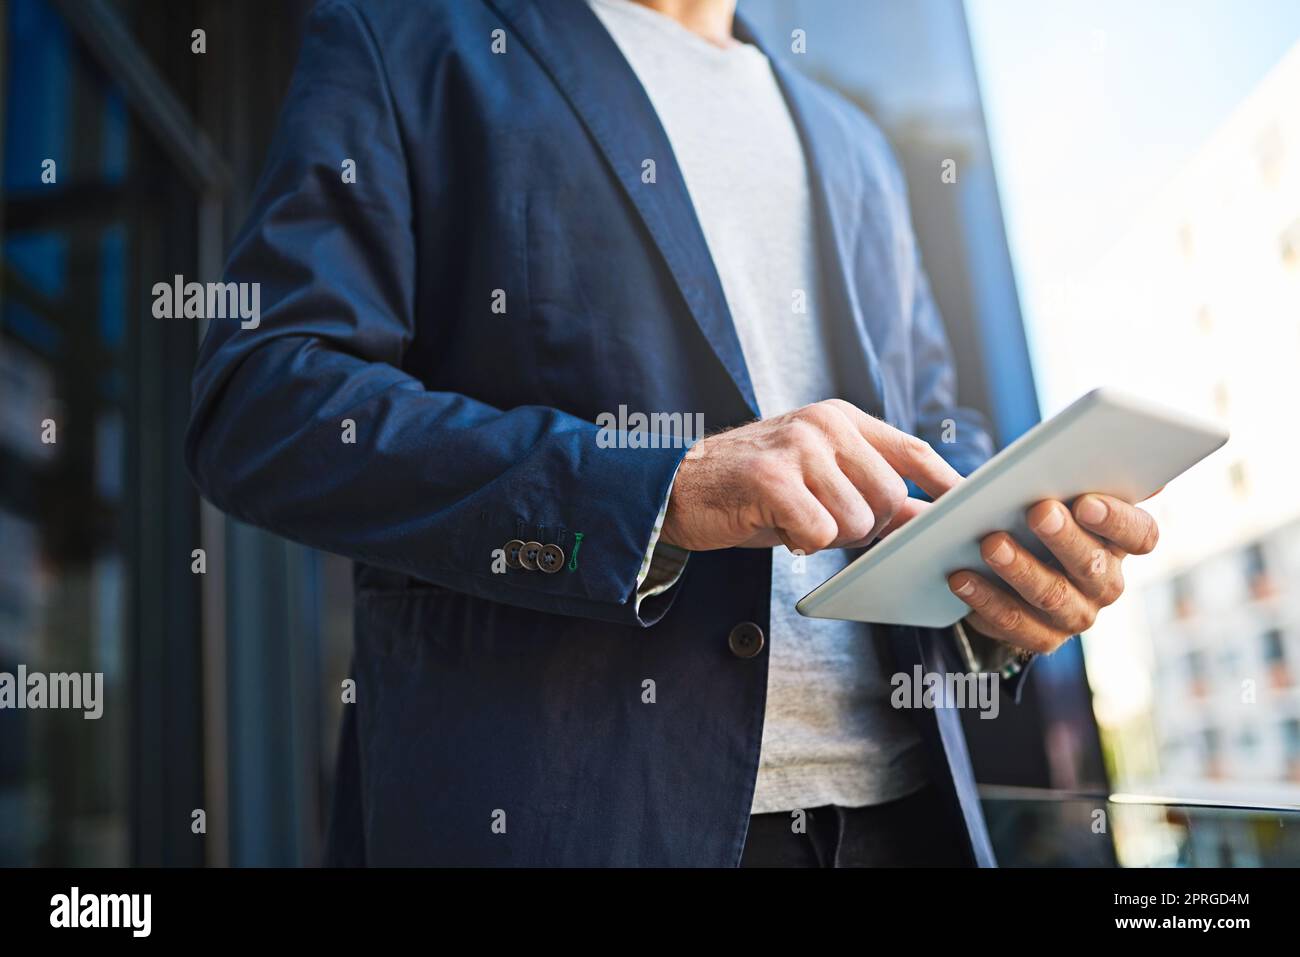 Technology gives him the competitive edge. an unrecognizable businessman using his tablet while standing on a balcony. Stock Photo